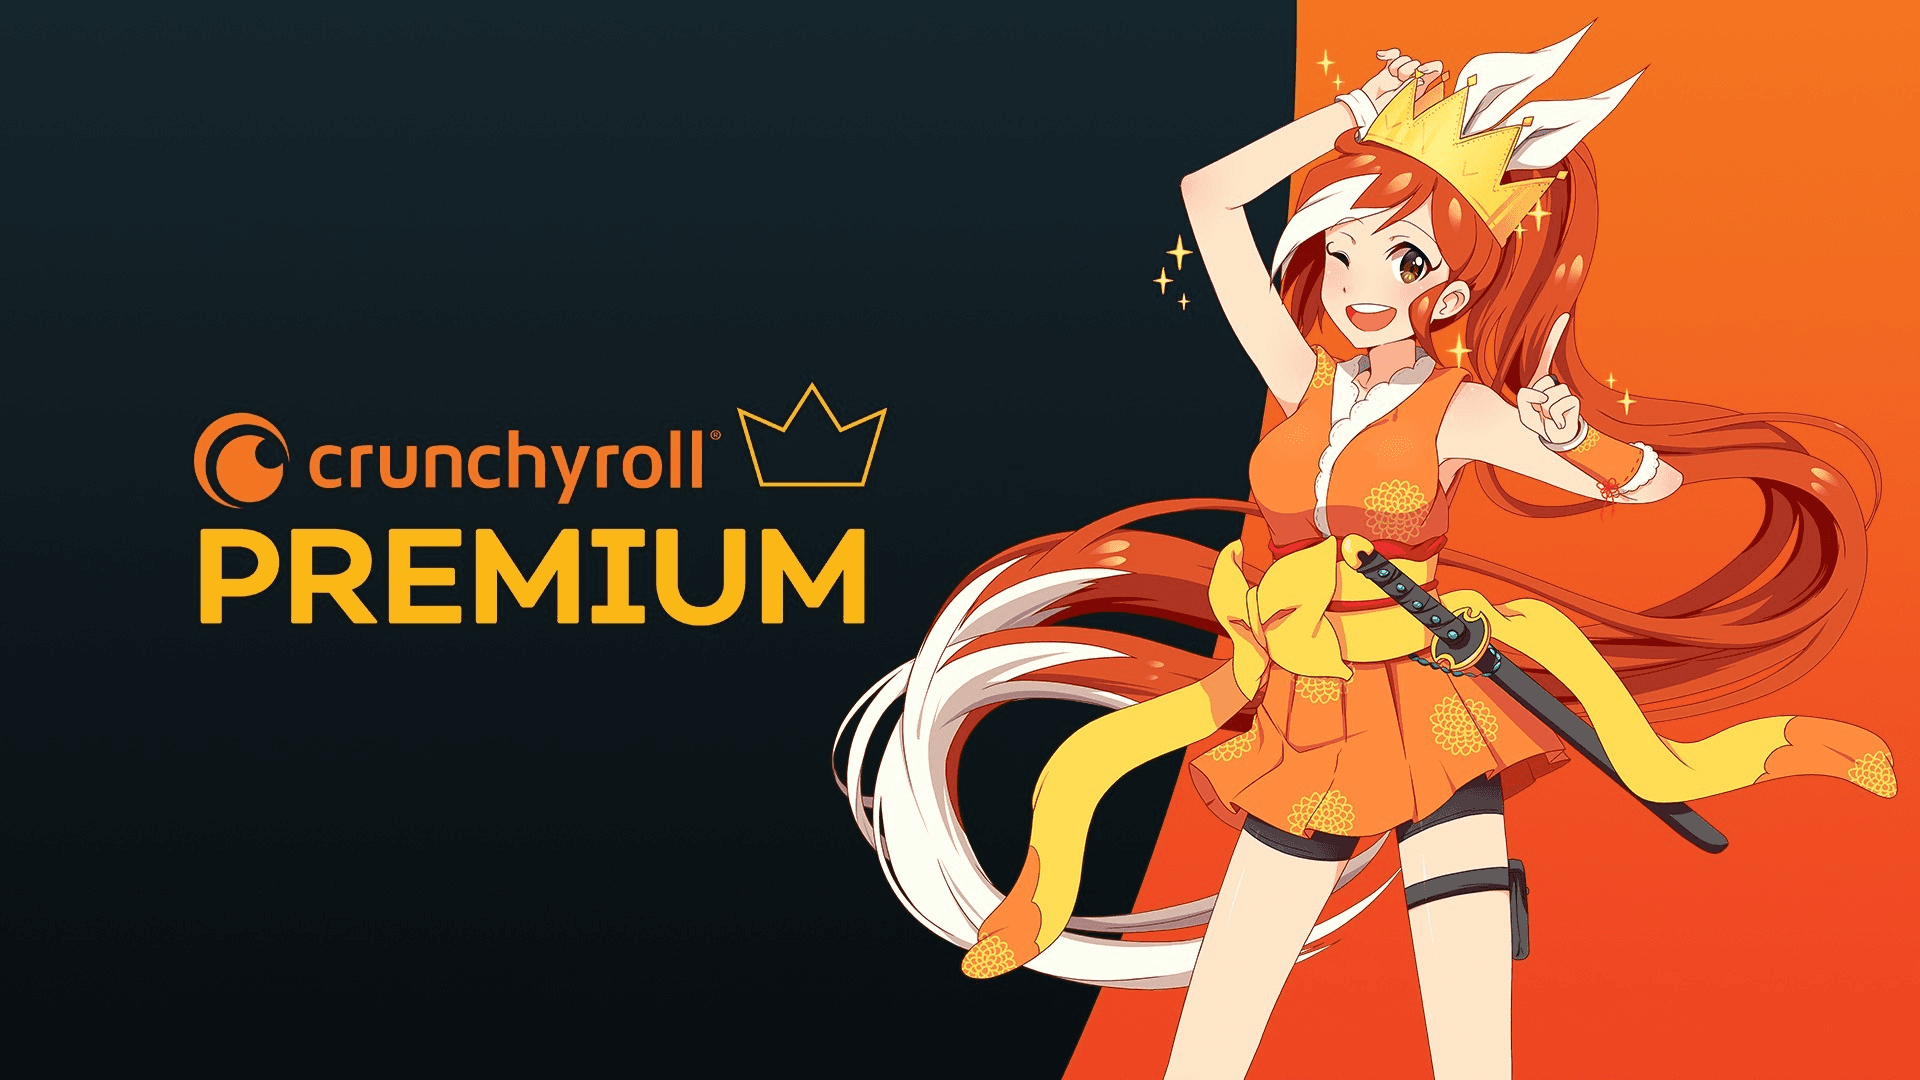 Crunchyroll student discounts don't exist. Maybe you can get a Crunchyroll student discount through Student Beans ( you will need a student ID), or just using Crunchyroll promo codes. 